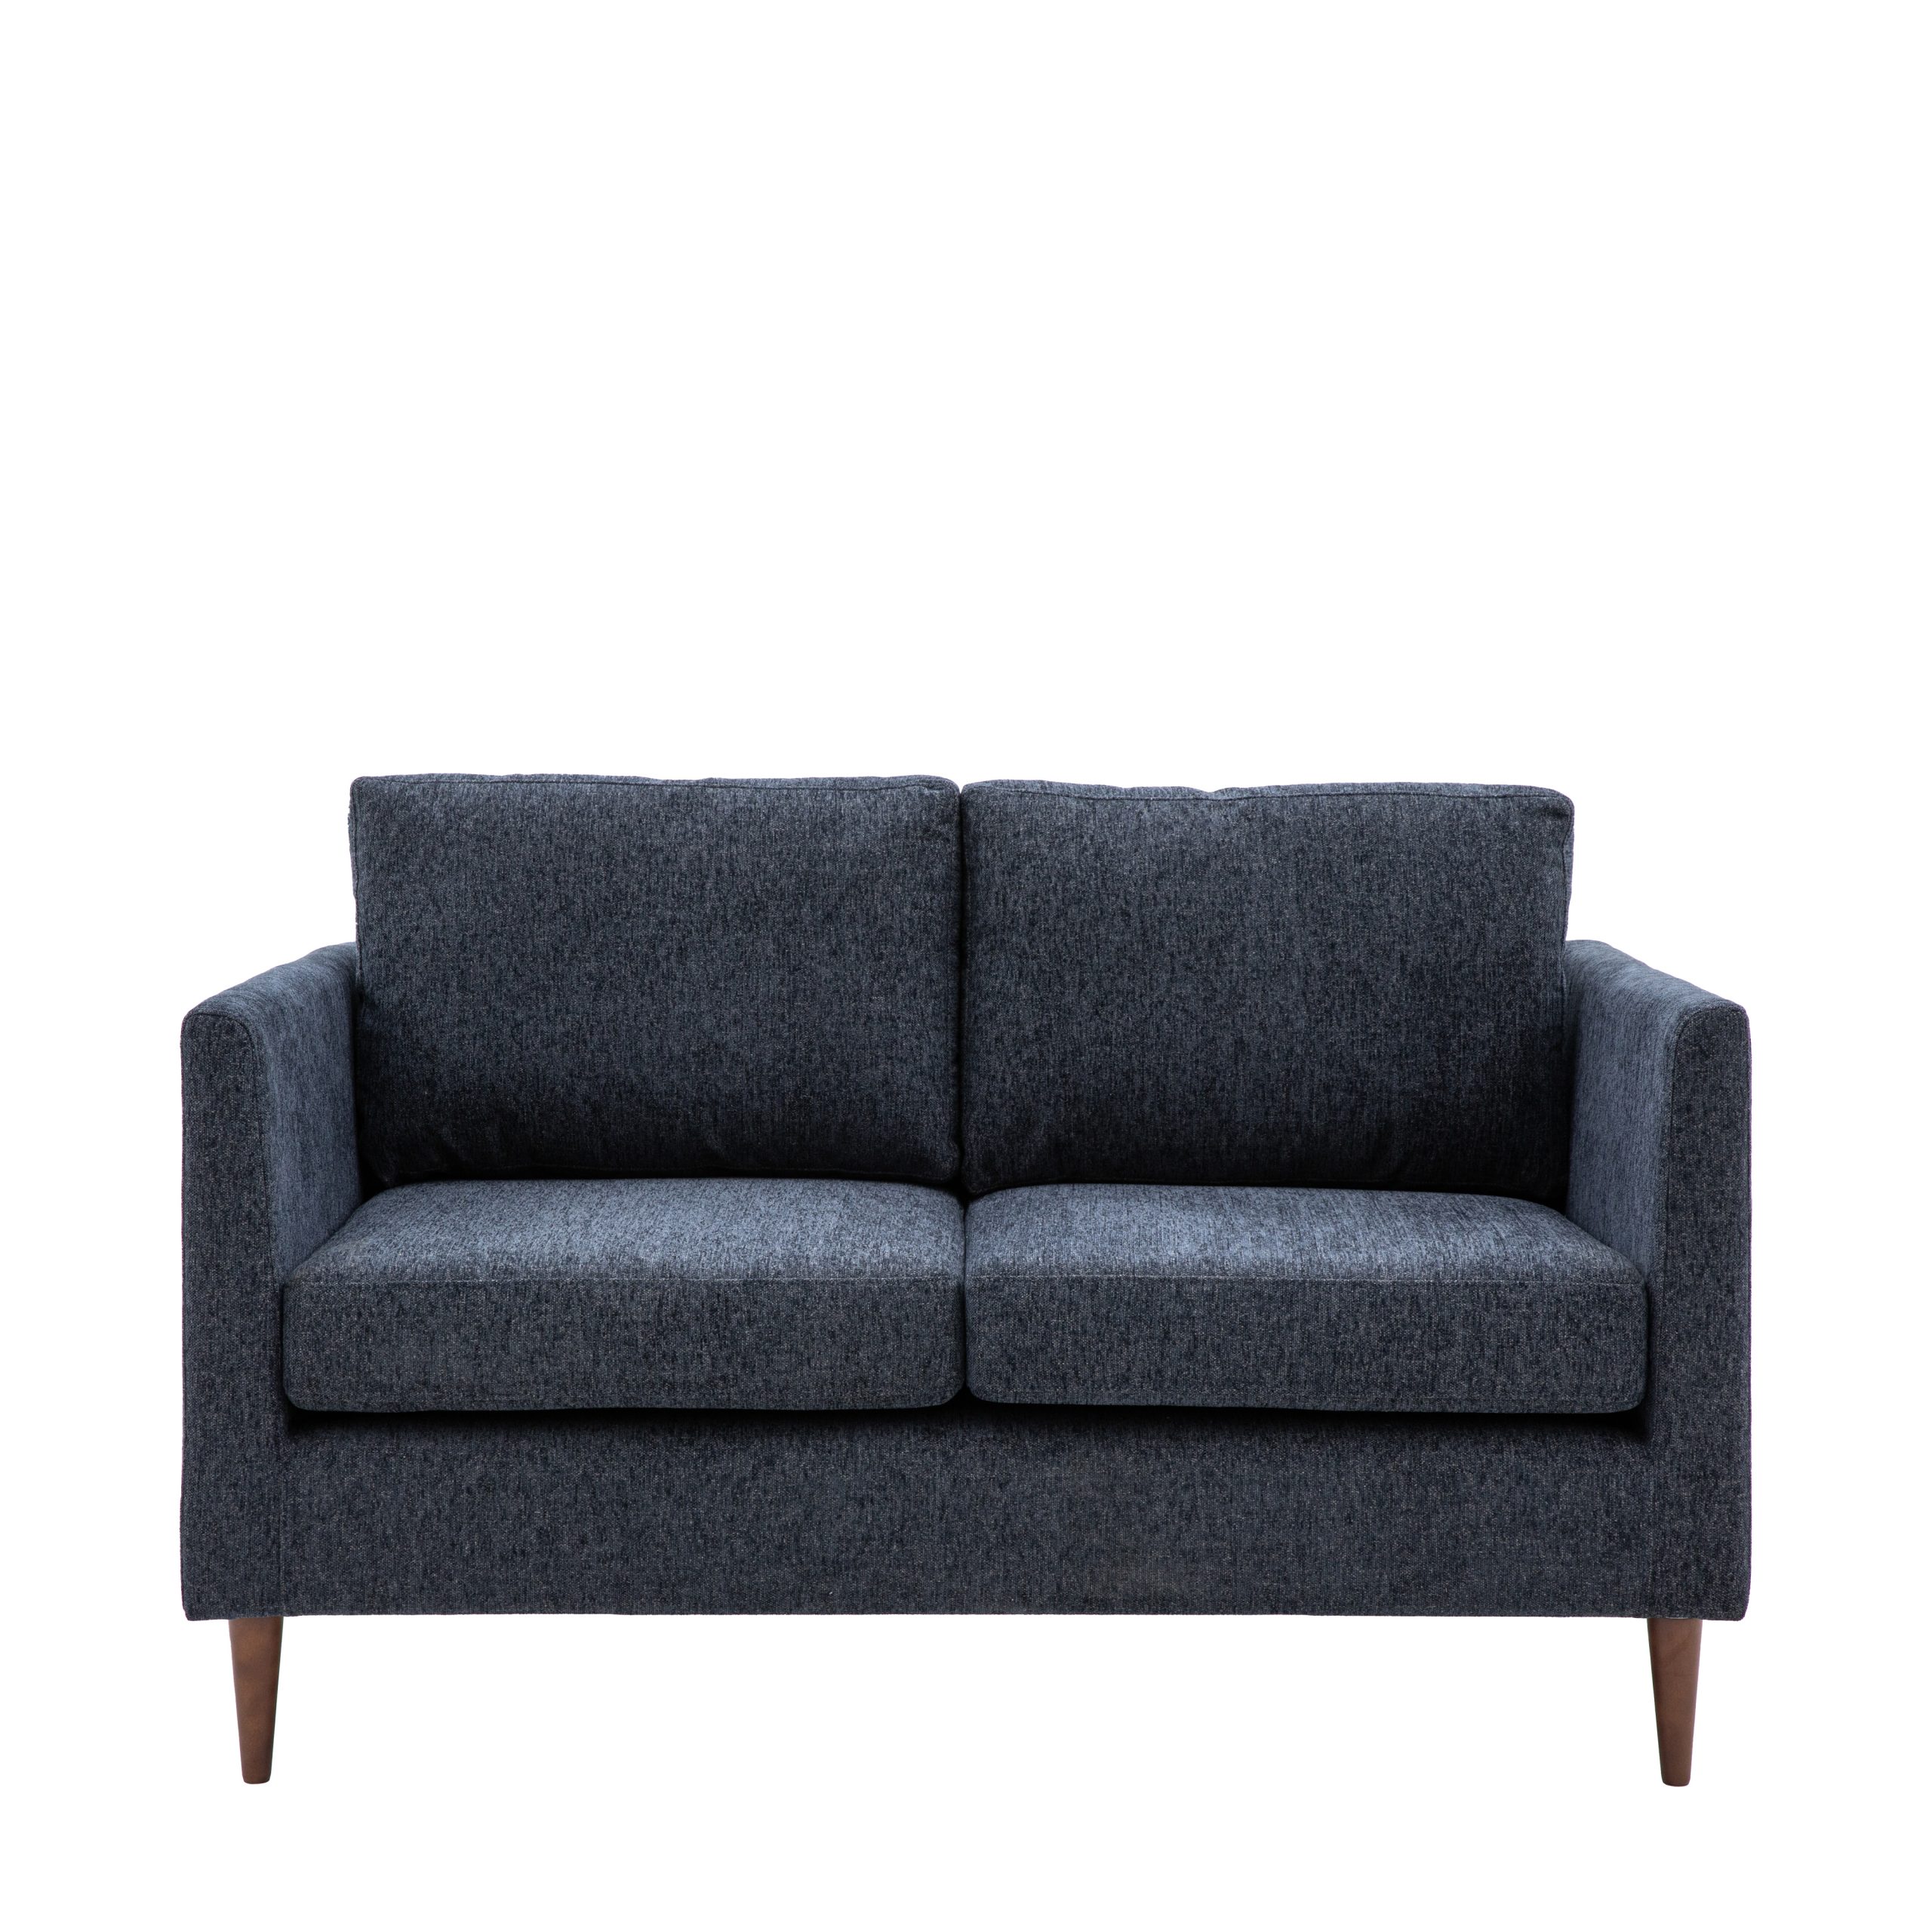 Gallery Direct Gateford Sofa 2 Seater Charcoal